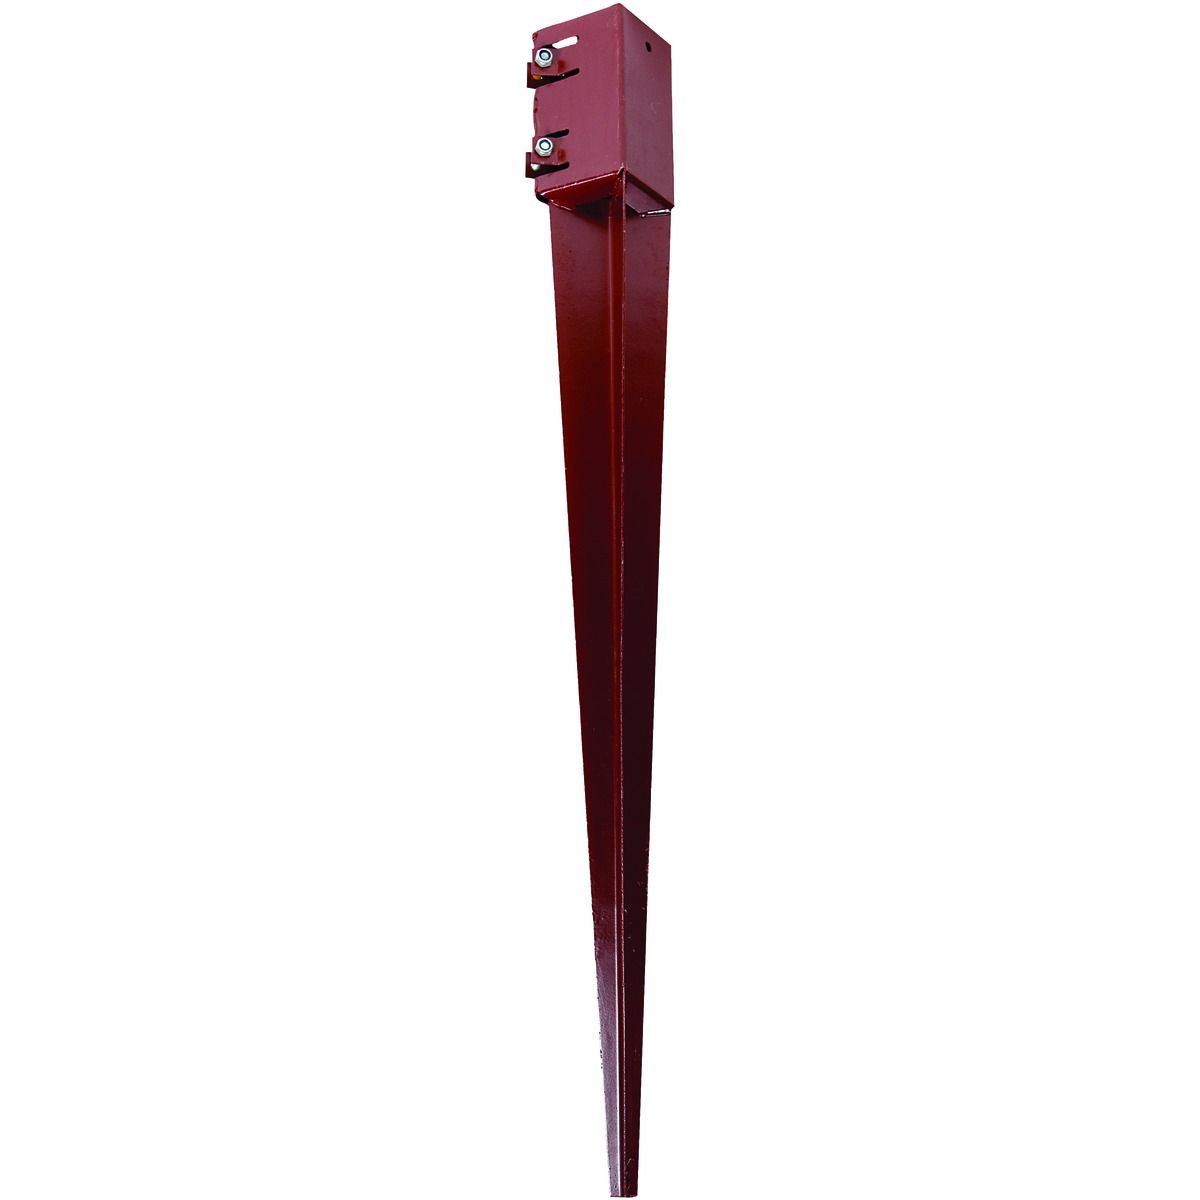 Image of Wickes Bolt System 750mm Support Spike for Posts - 75 x 75mm